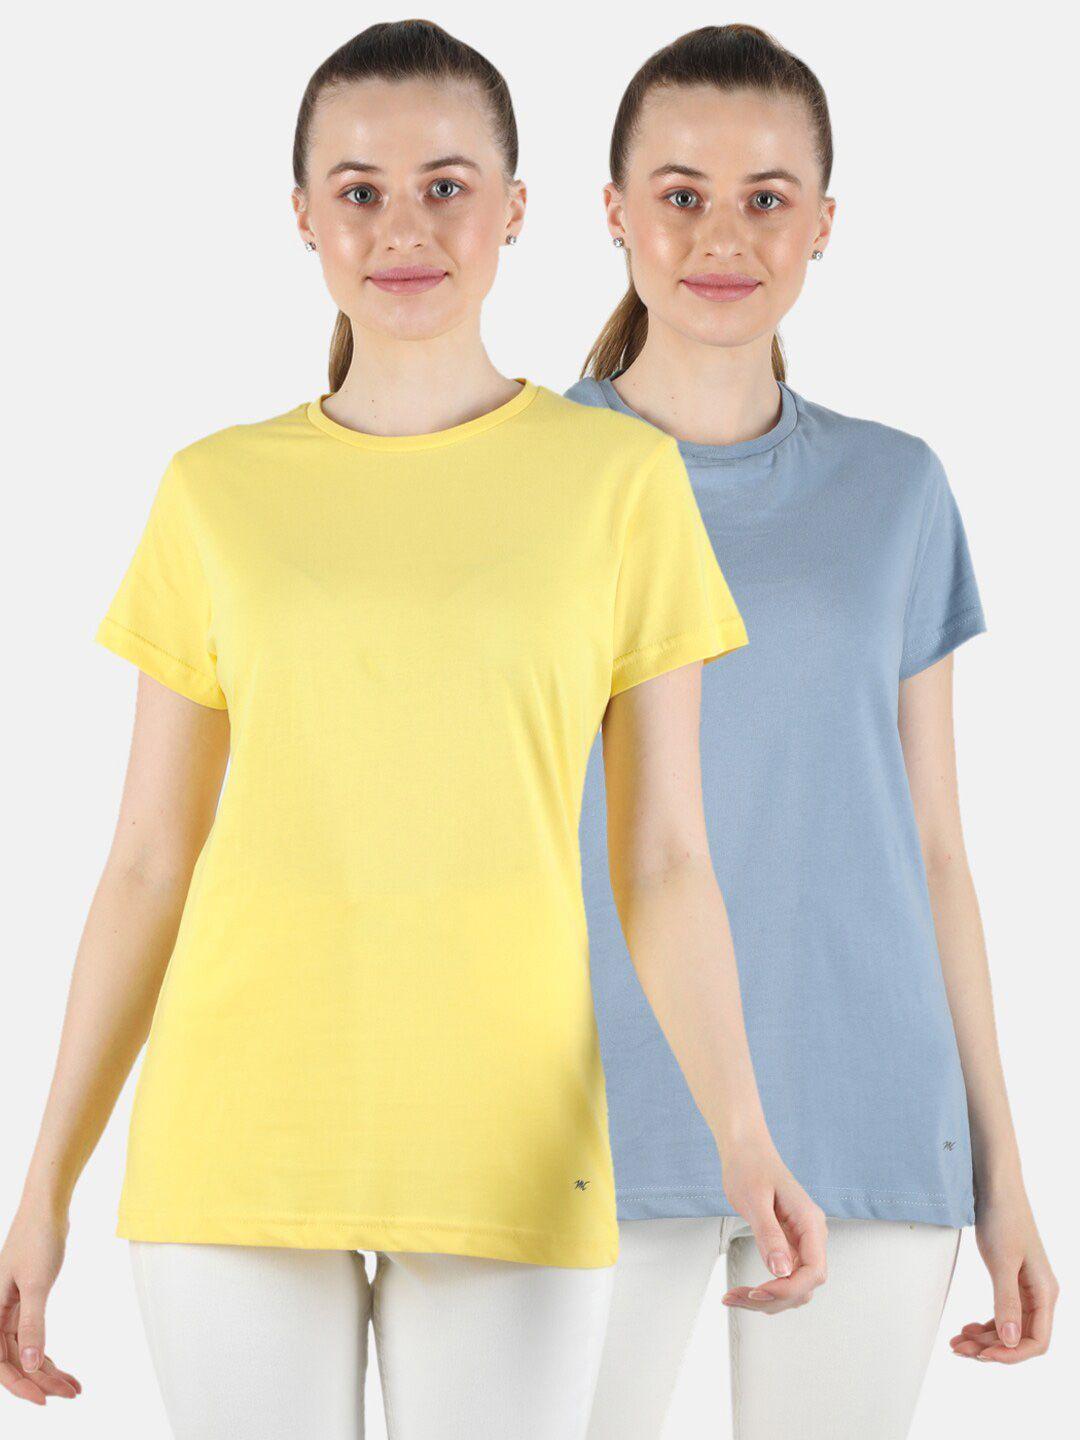 monte carlo set of 2 solid yellow & grey tops